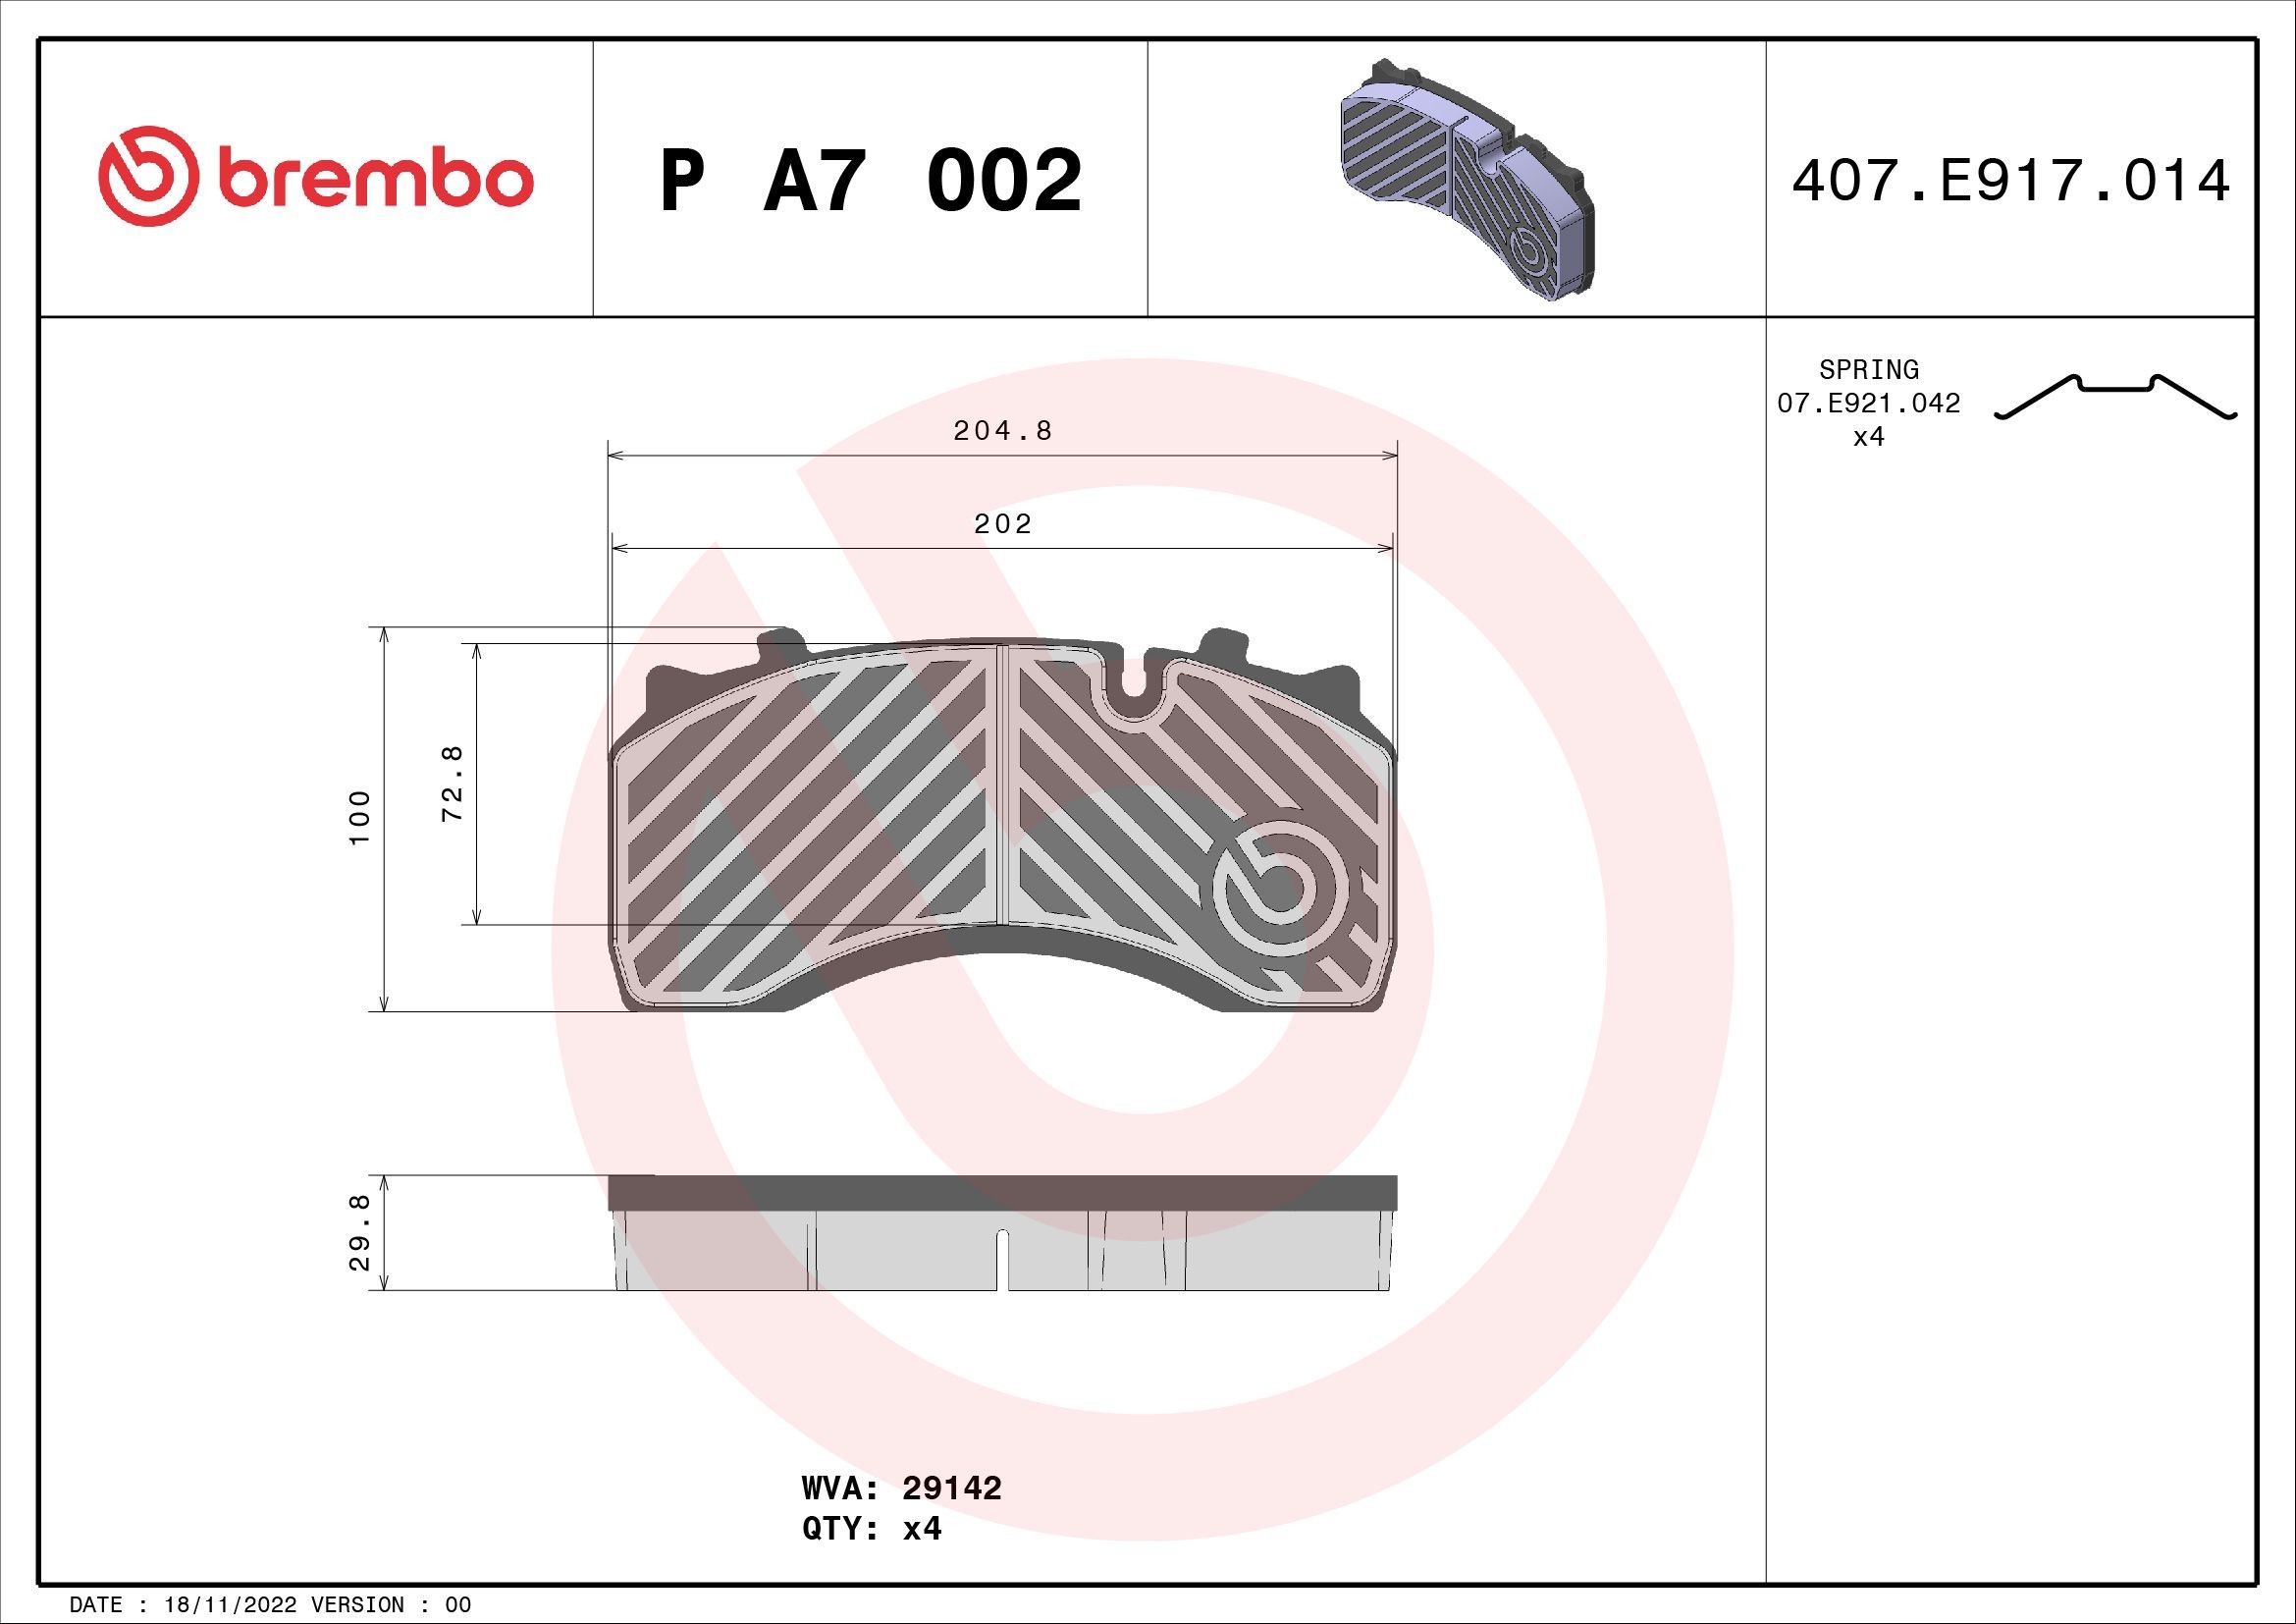 BREMBO P A7 002 Brake pad set prepared for wear indicator, with accessories